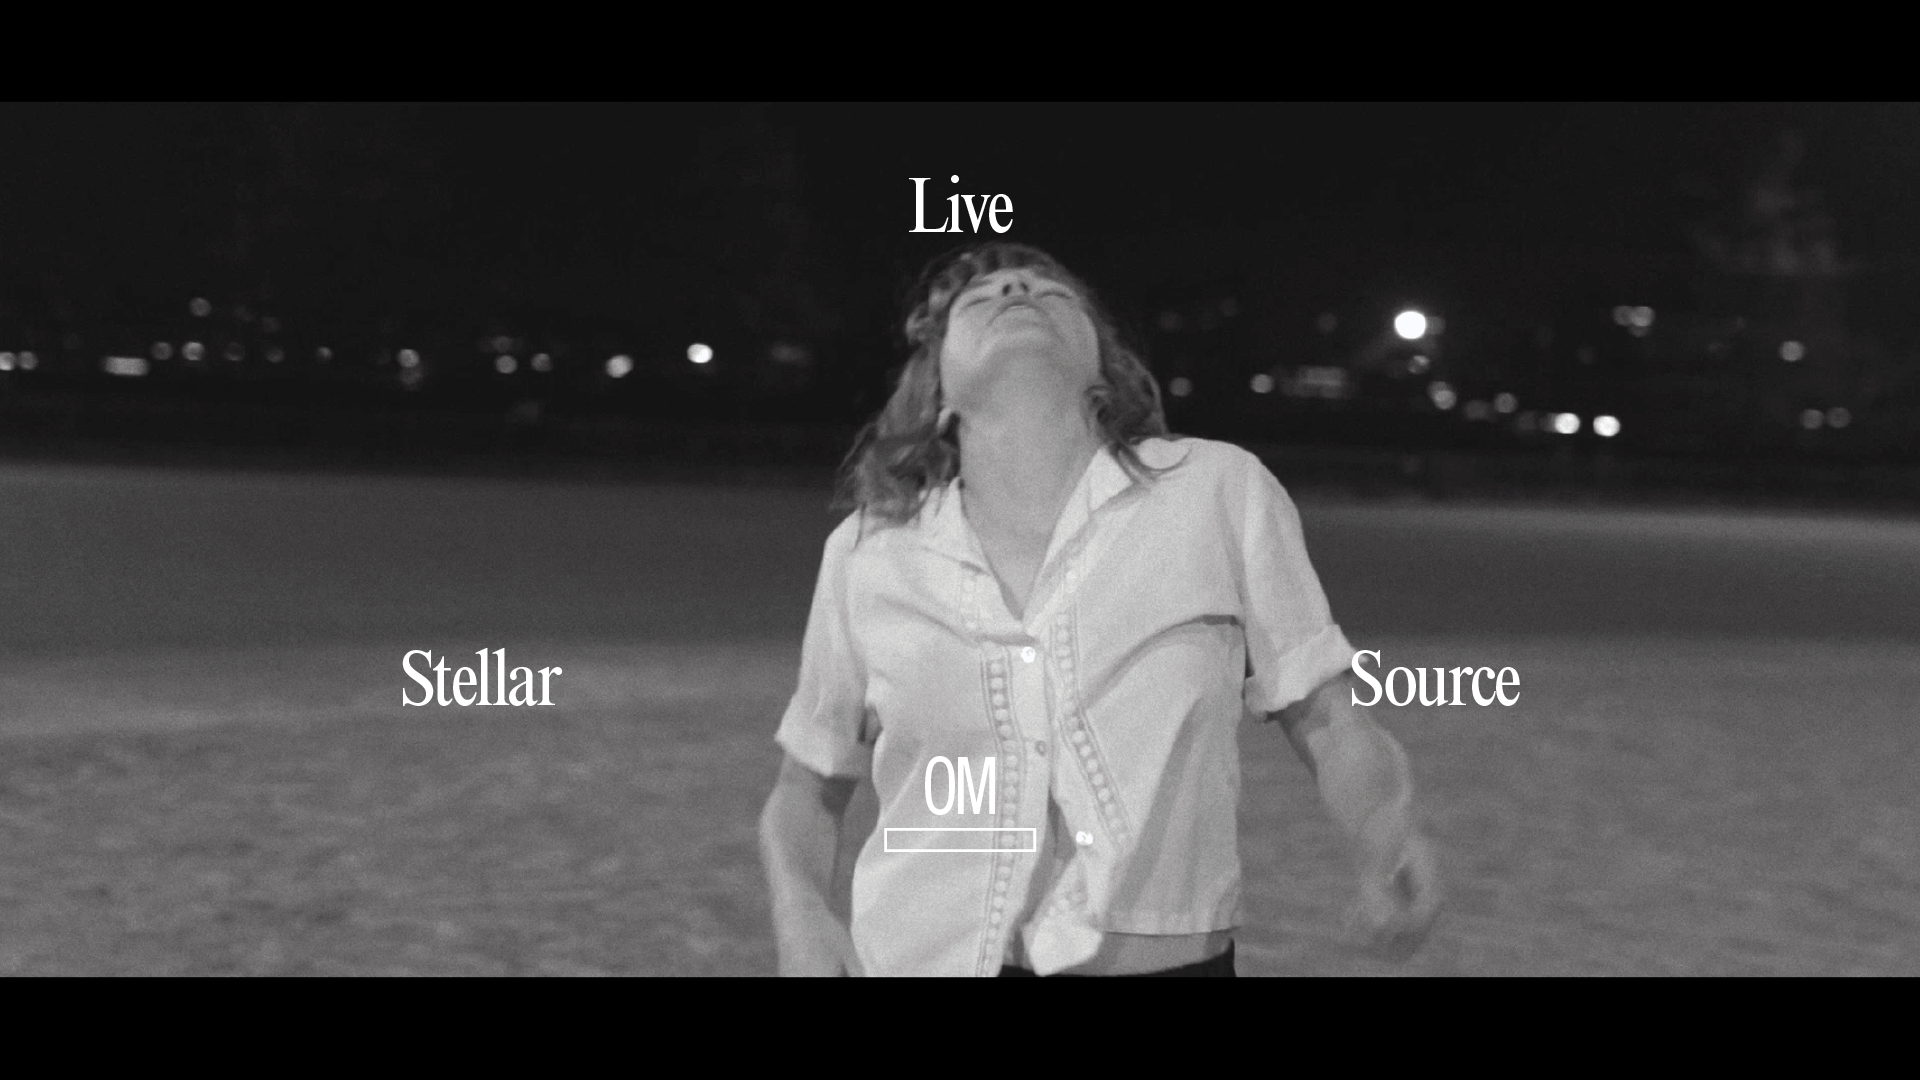 Link to Video for Stellar OM Source – Live [Official Video]